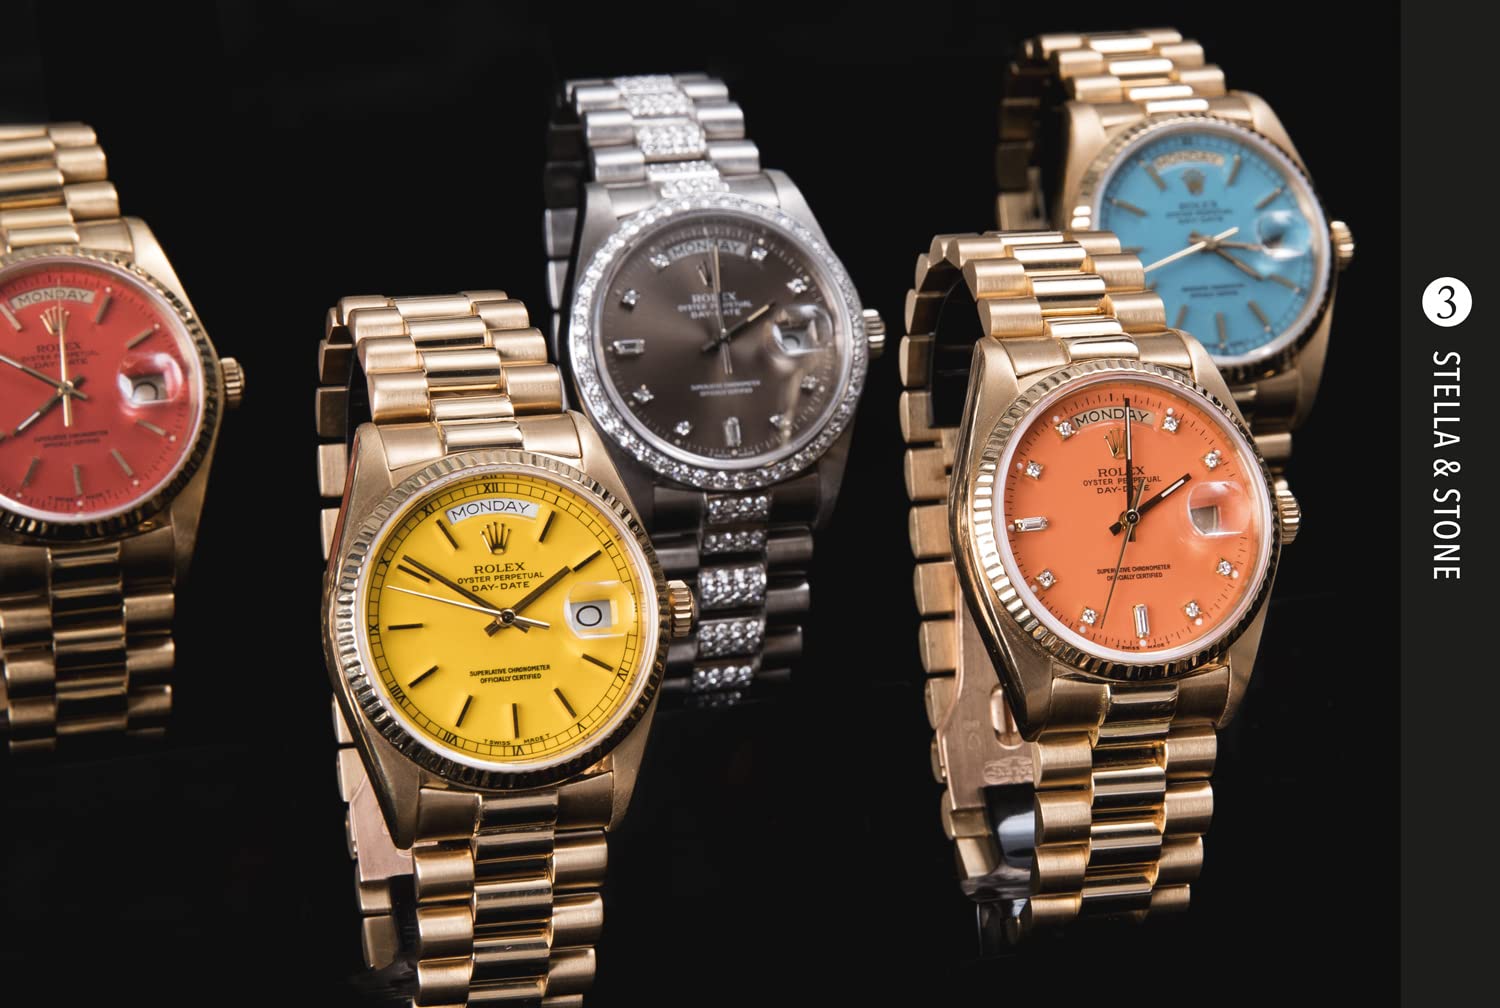 Vintage Rolex: The essential guide to the most iconic luxury watch brand of all time, Rolex.